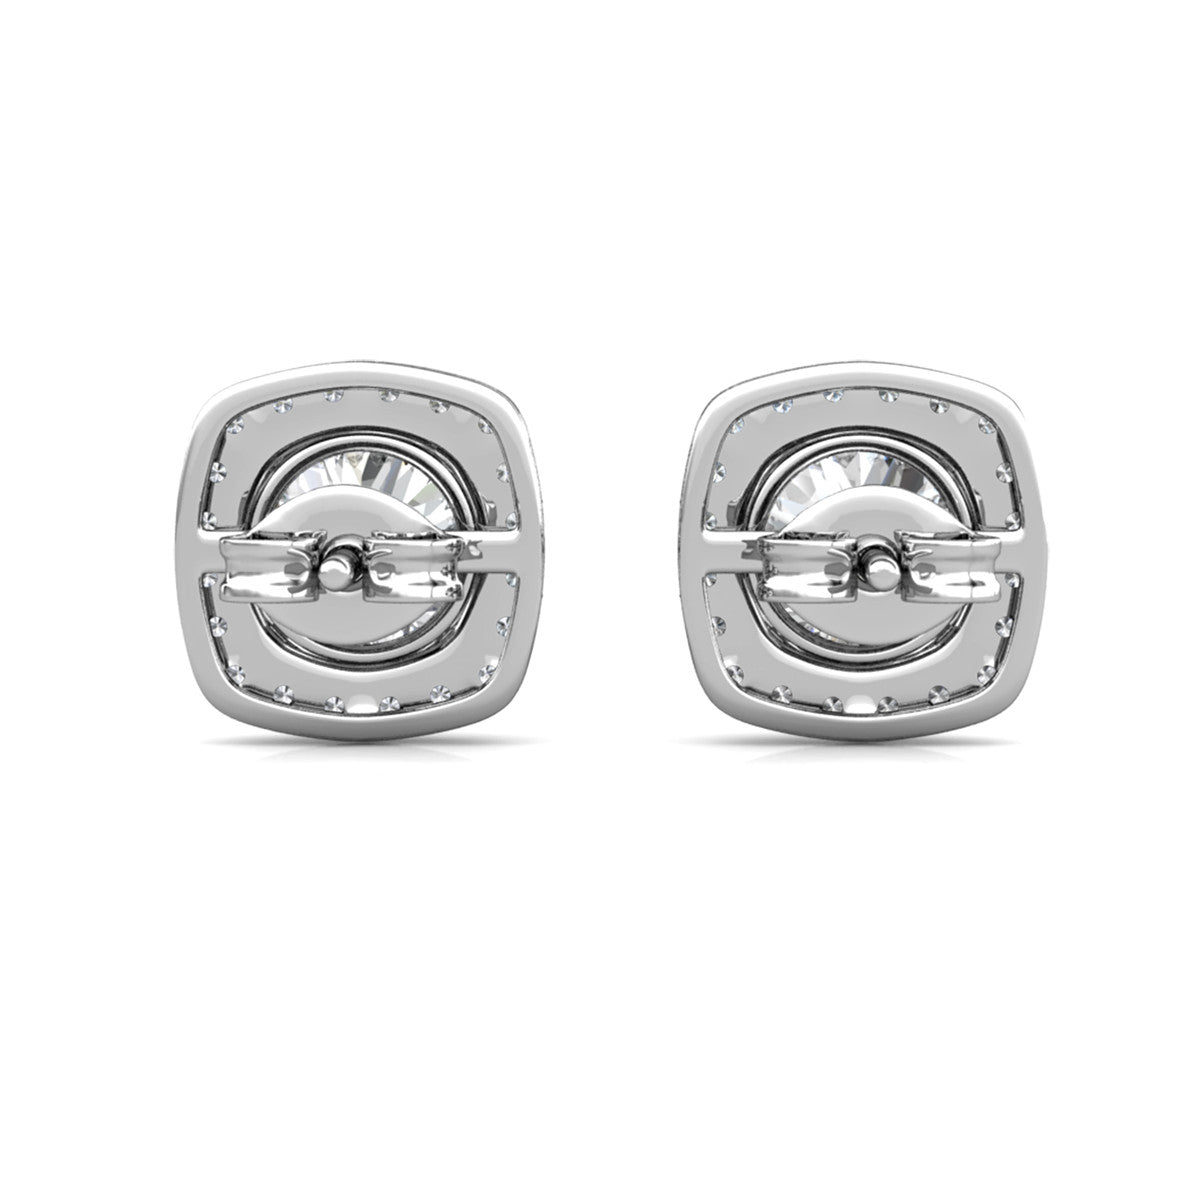 Moissanite by Cate & Chloe Hannah Sterling Silver Stud Earrings with Moissanite and 5A Cubic Zirconia Crystals